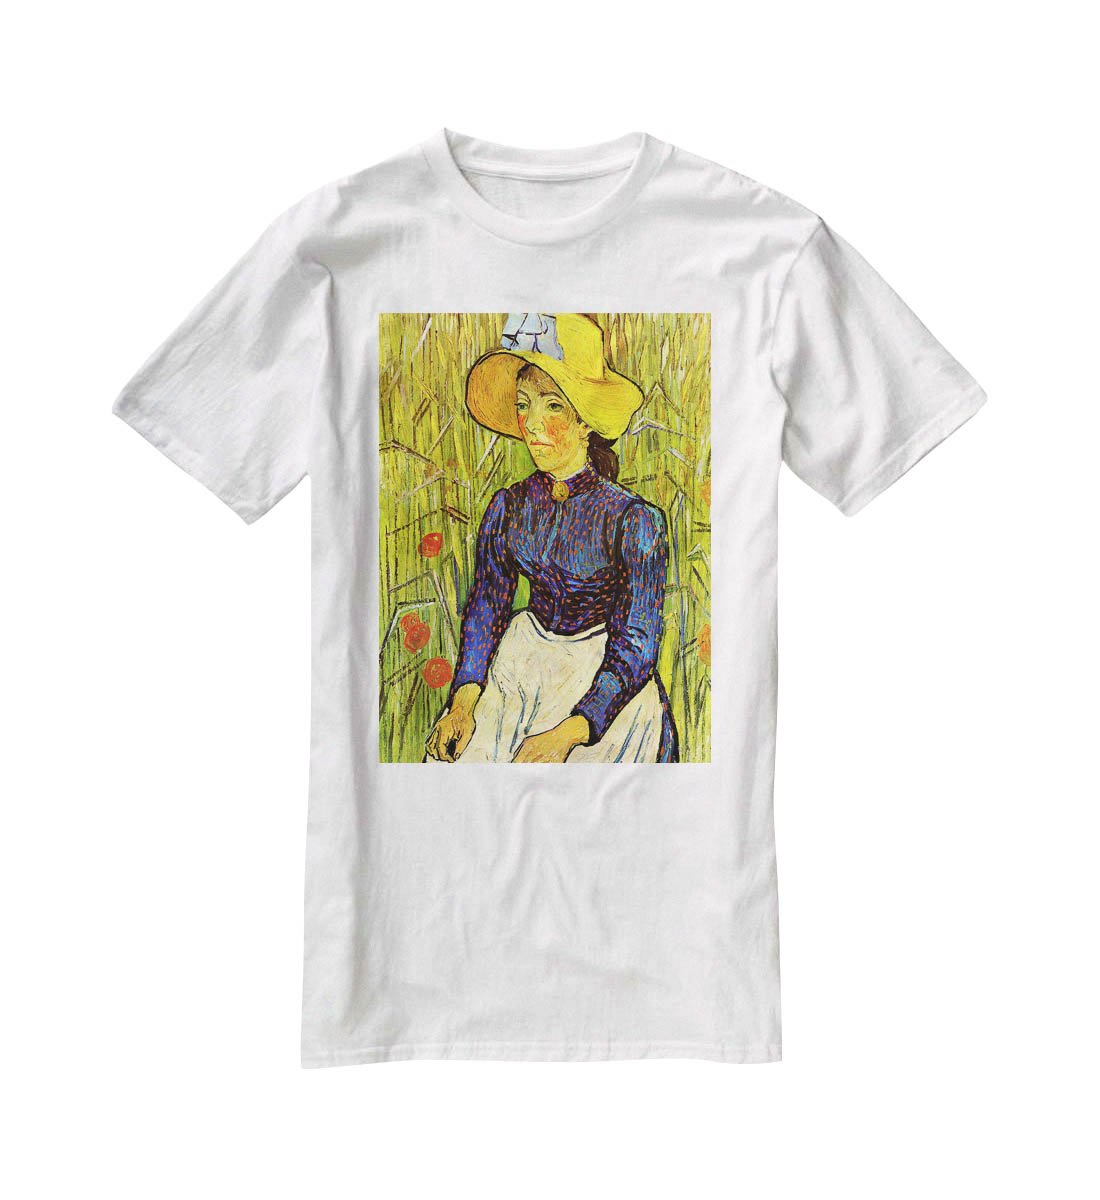 Young Peasant Woman with Straw Hat Sitting in the Wheat by Van Gogh T-Shirt - Canvas Art Rocks - 5